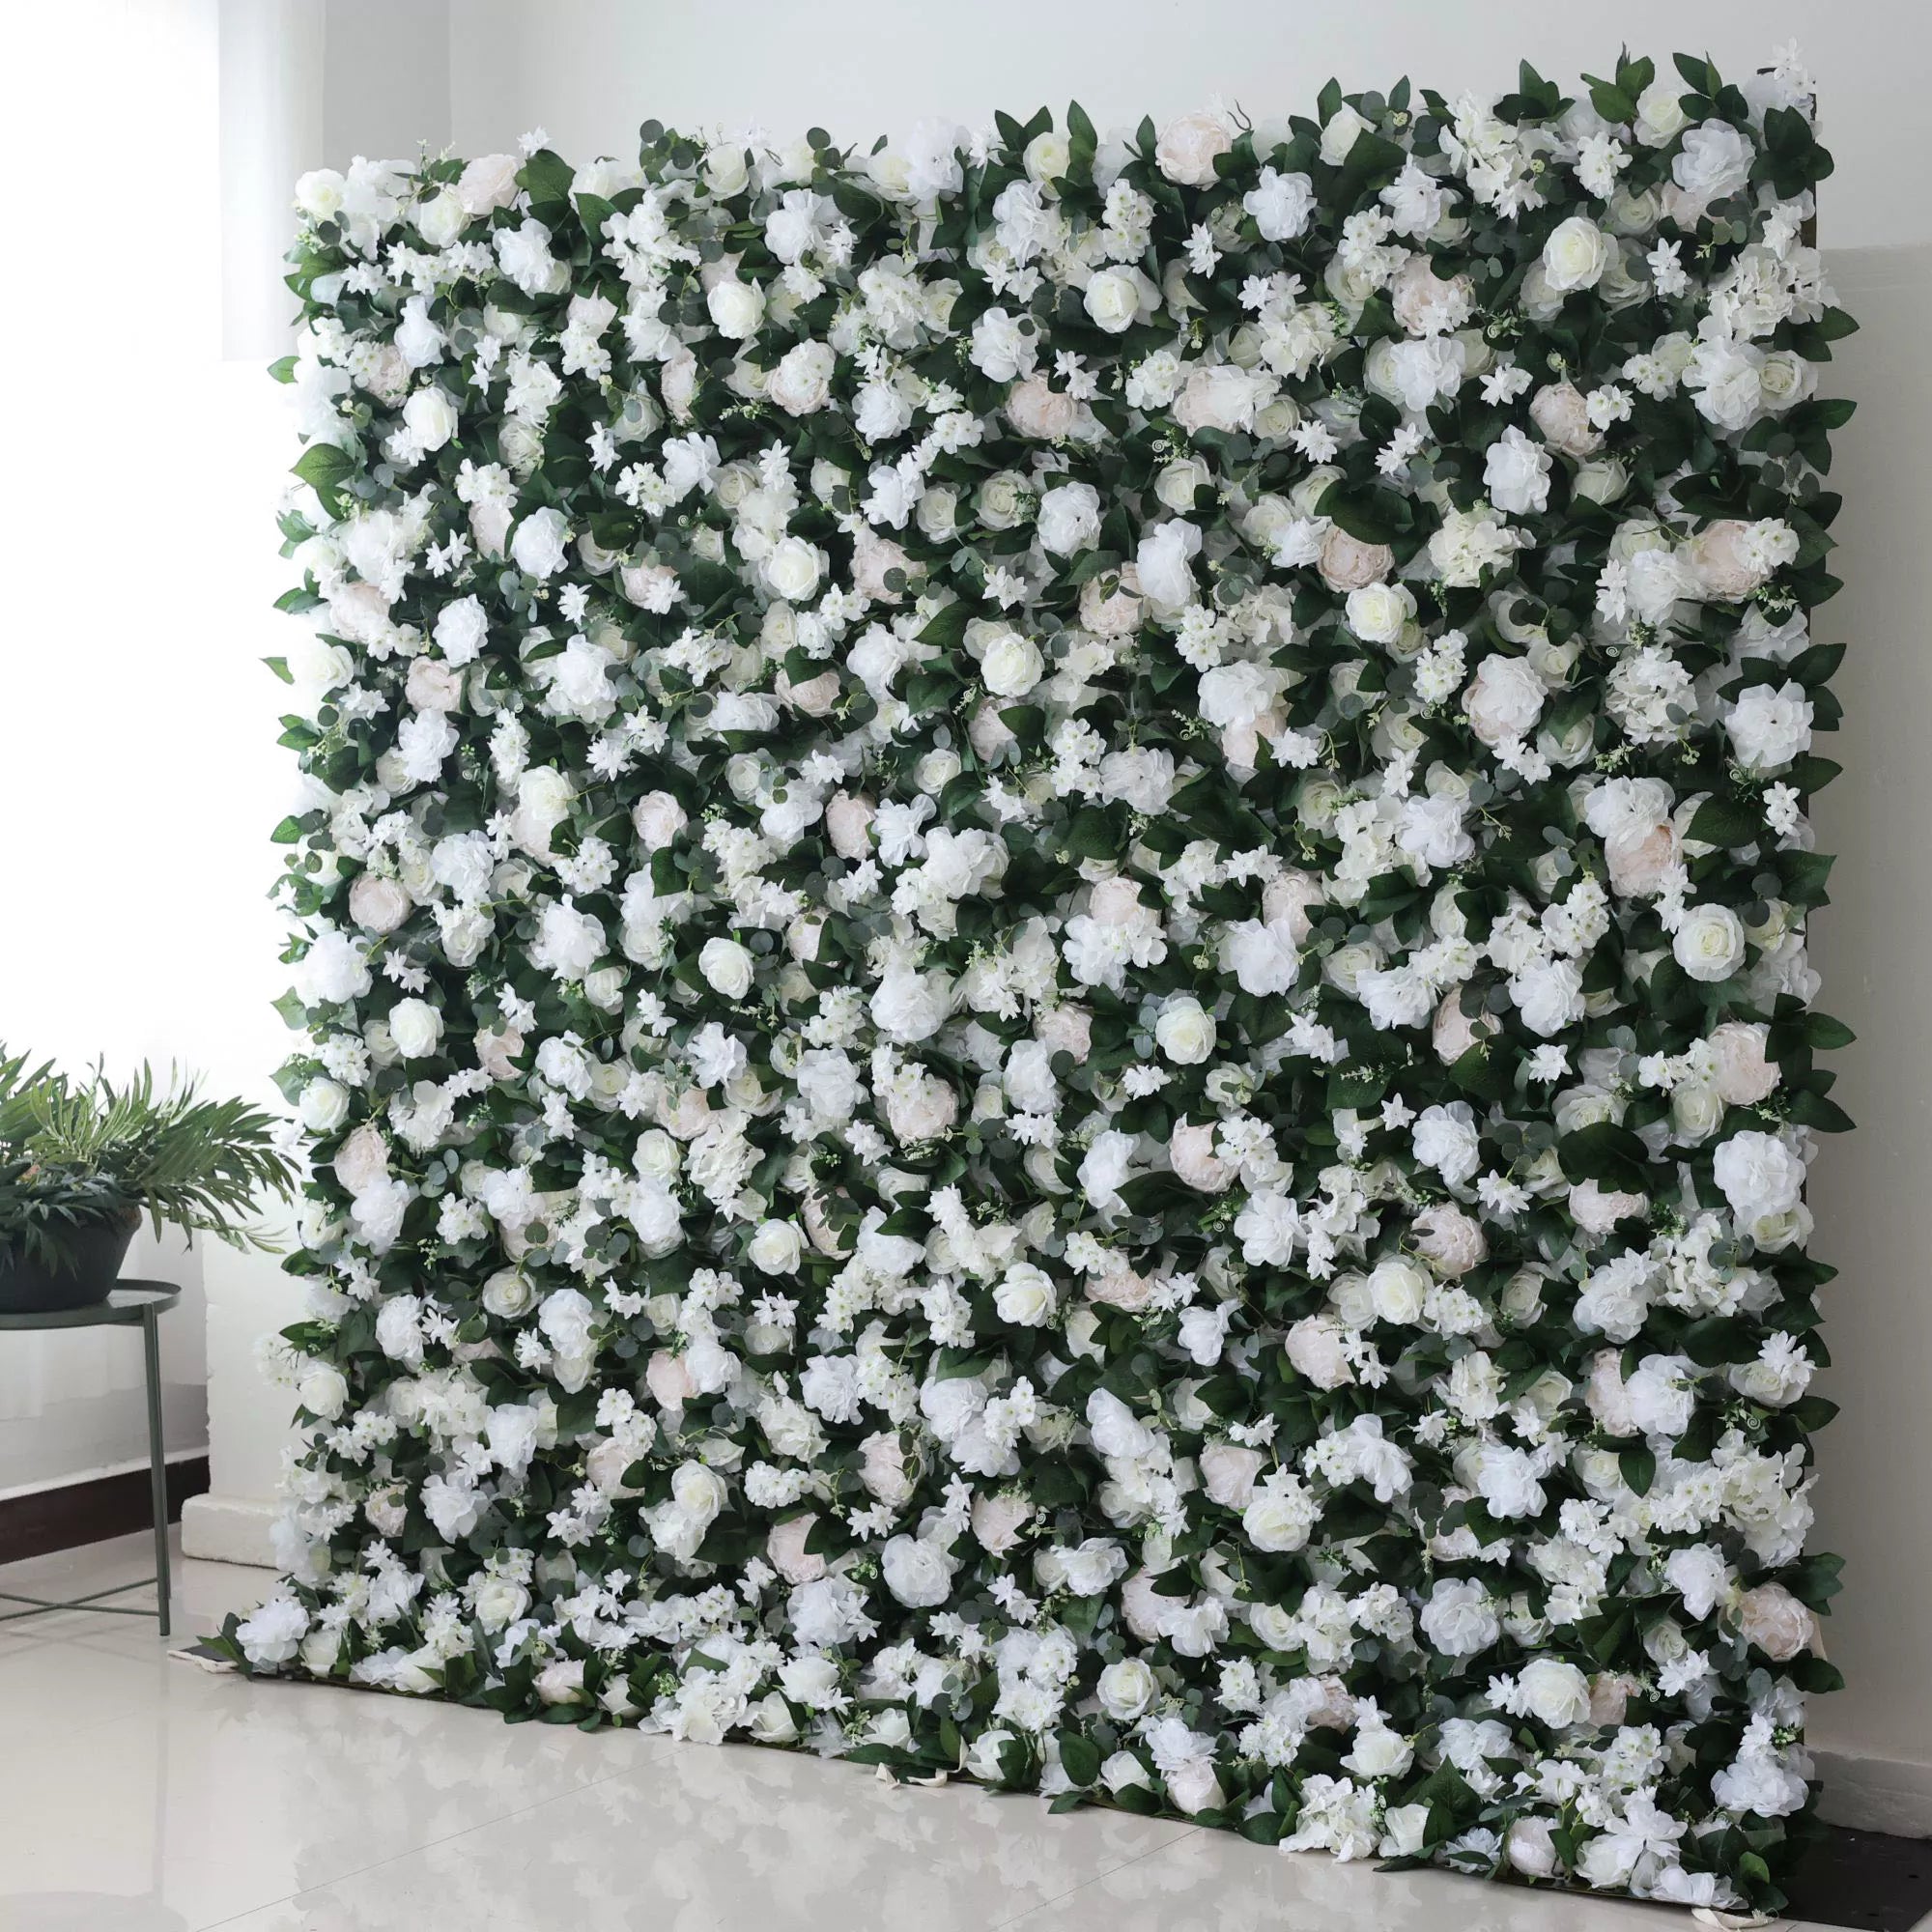 ValarFlowers Backdrop: Dive into the Enchanted Garden - a harmonious blend of whimsical whites and verdant greenery. A timeless piece radiating serenity and ethereal elegance.